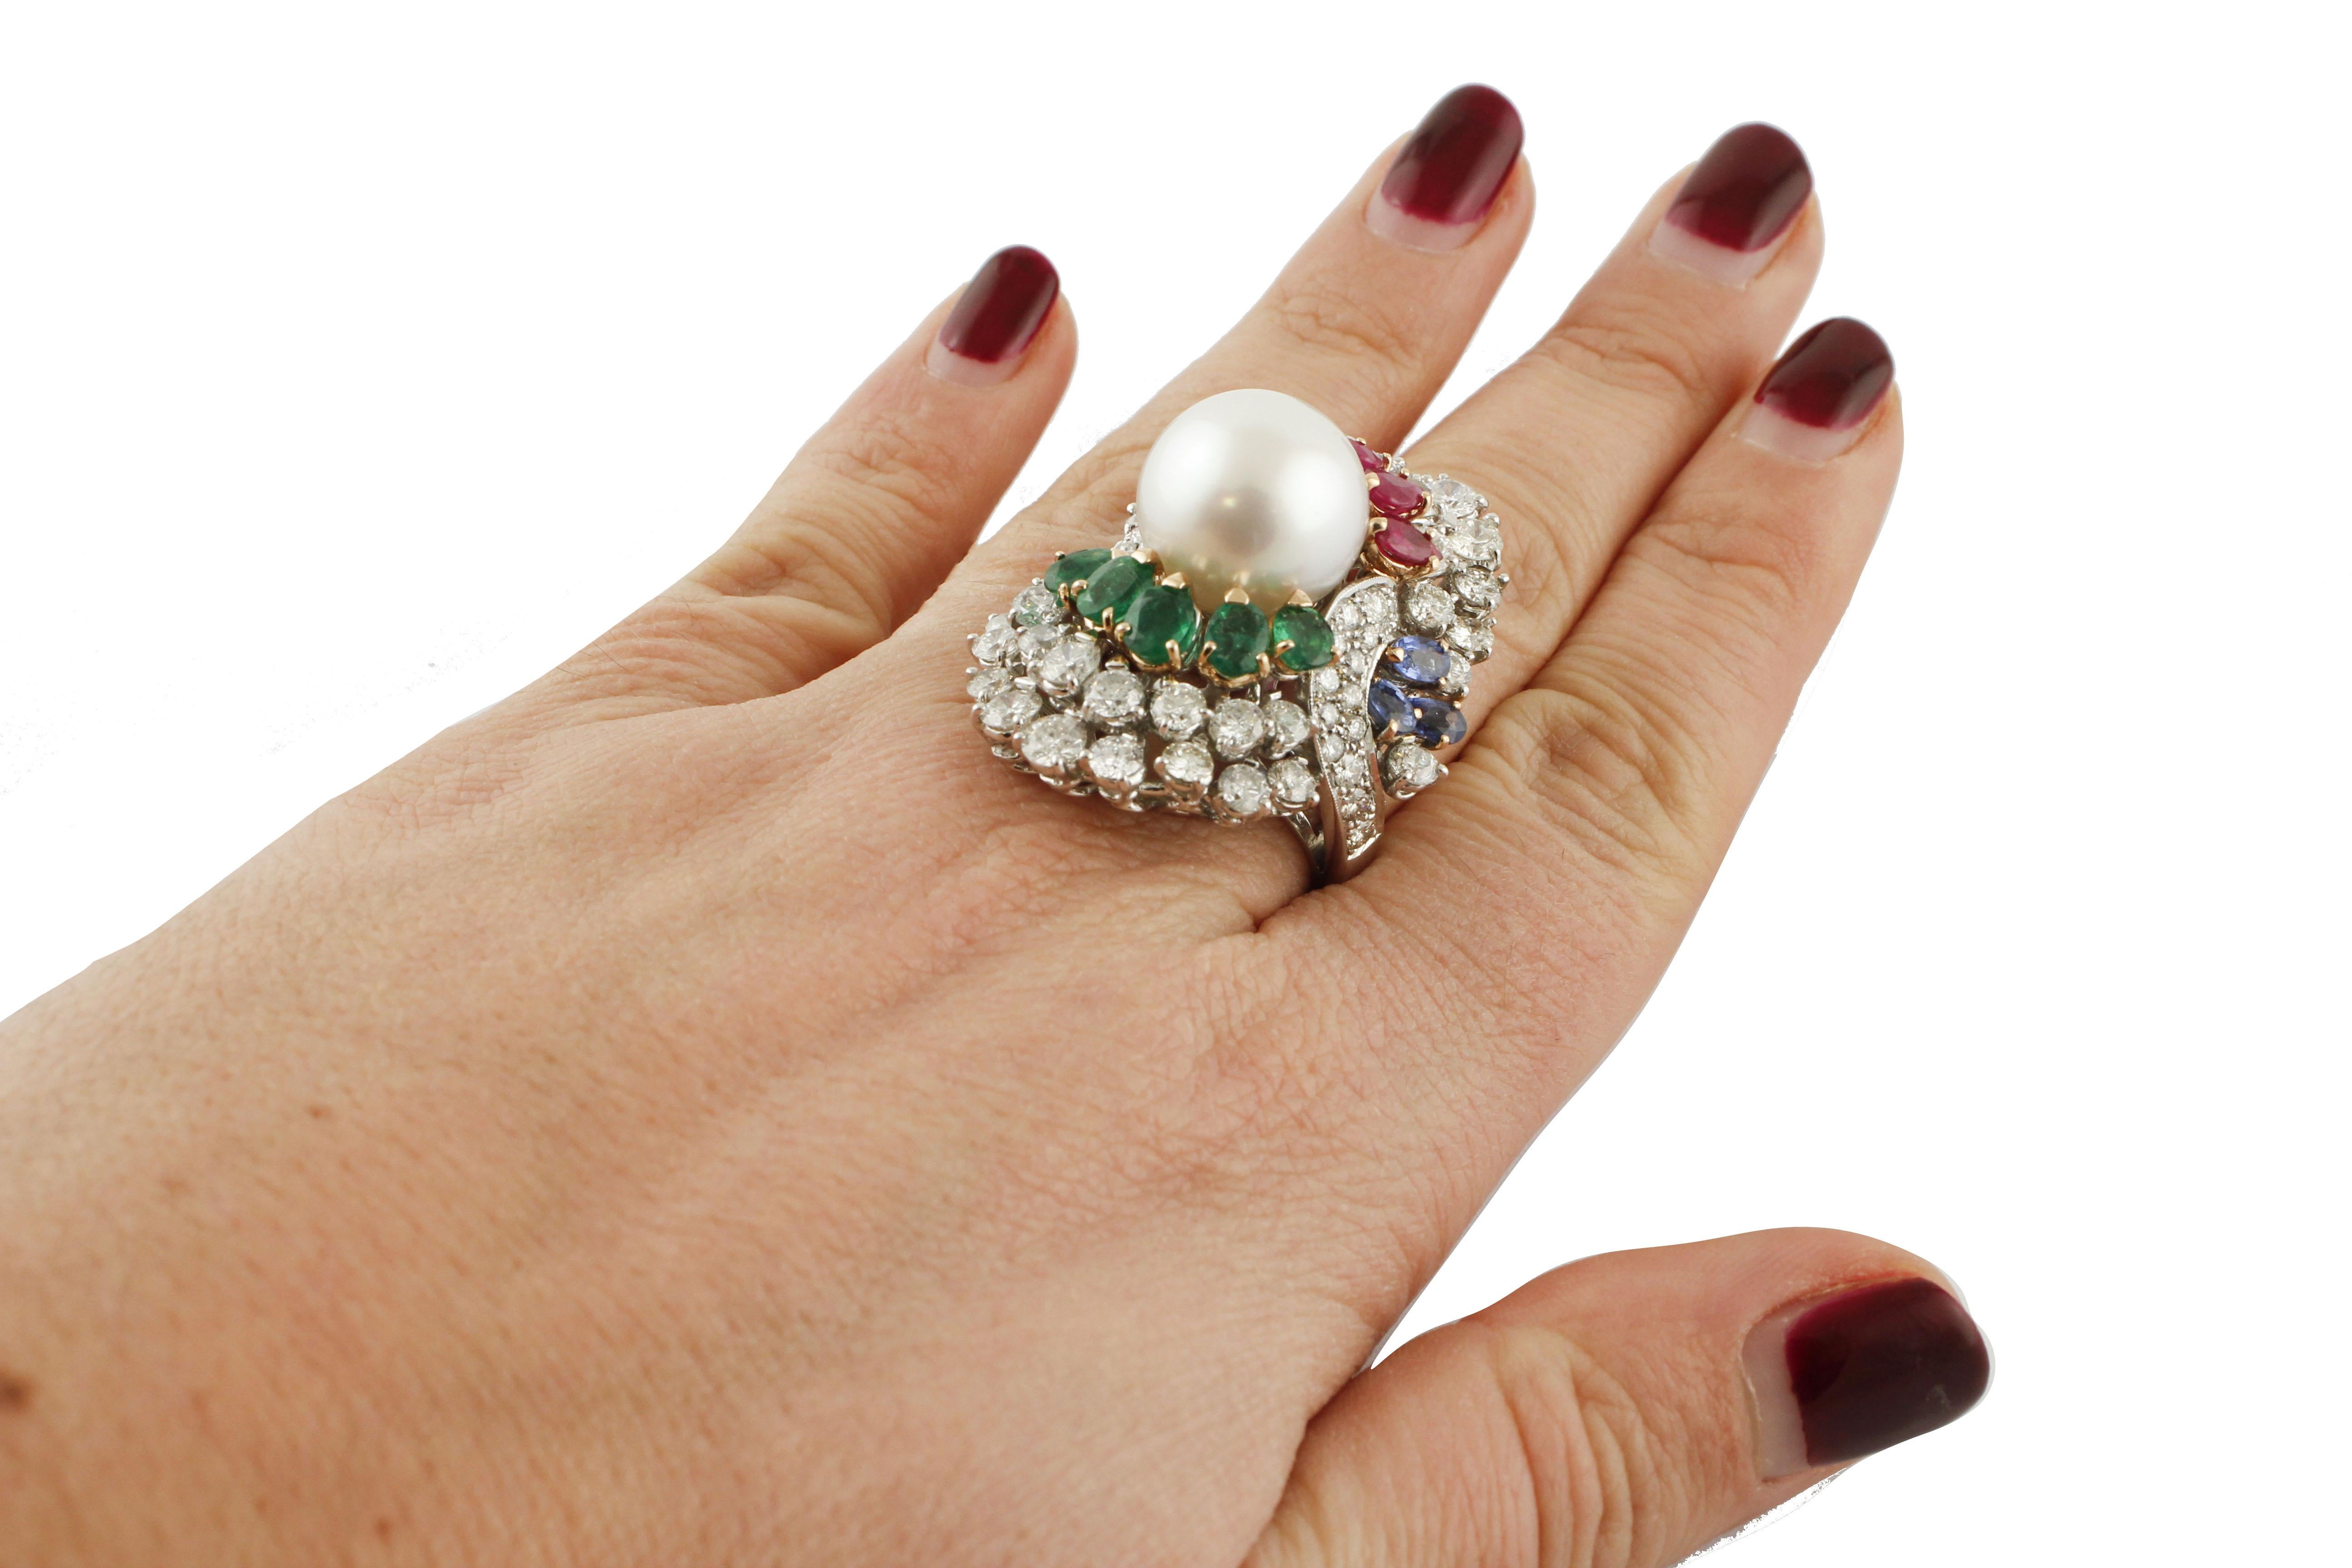 Mixed Cut Diamonds Sapphires Rubies Emeralds Pearl White Gold Ring